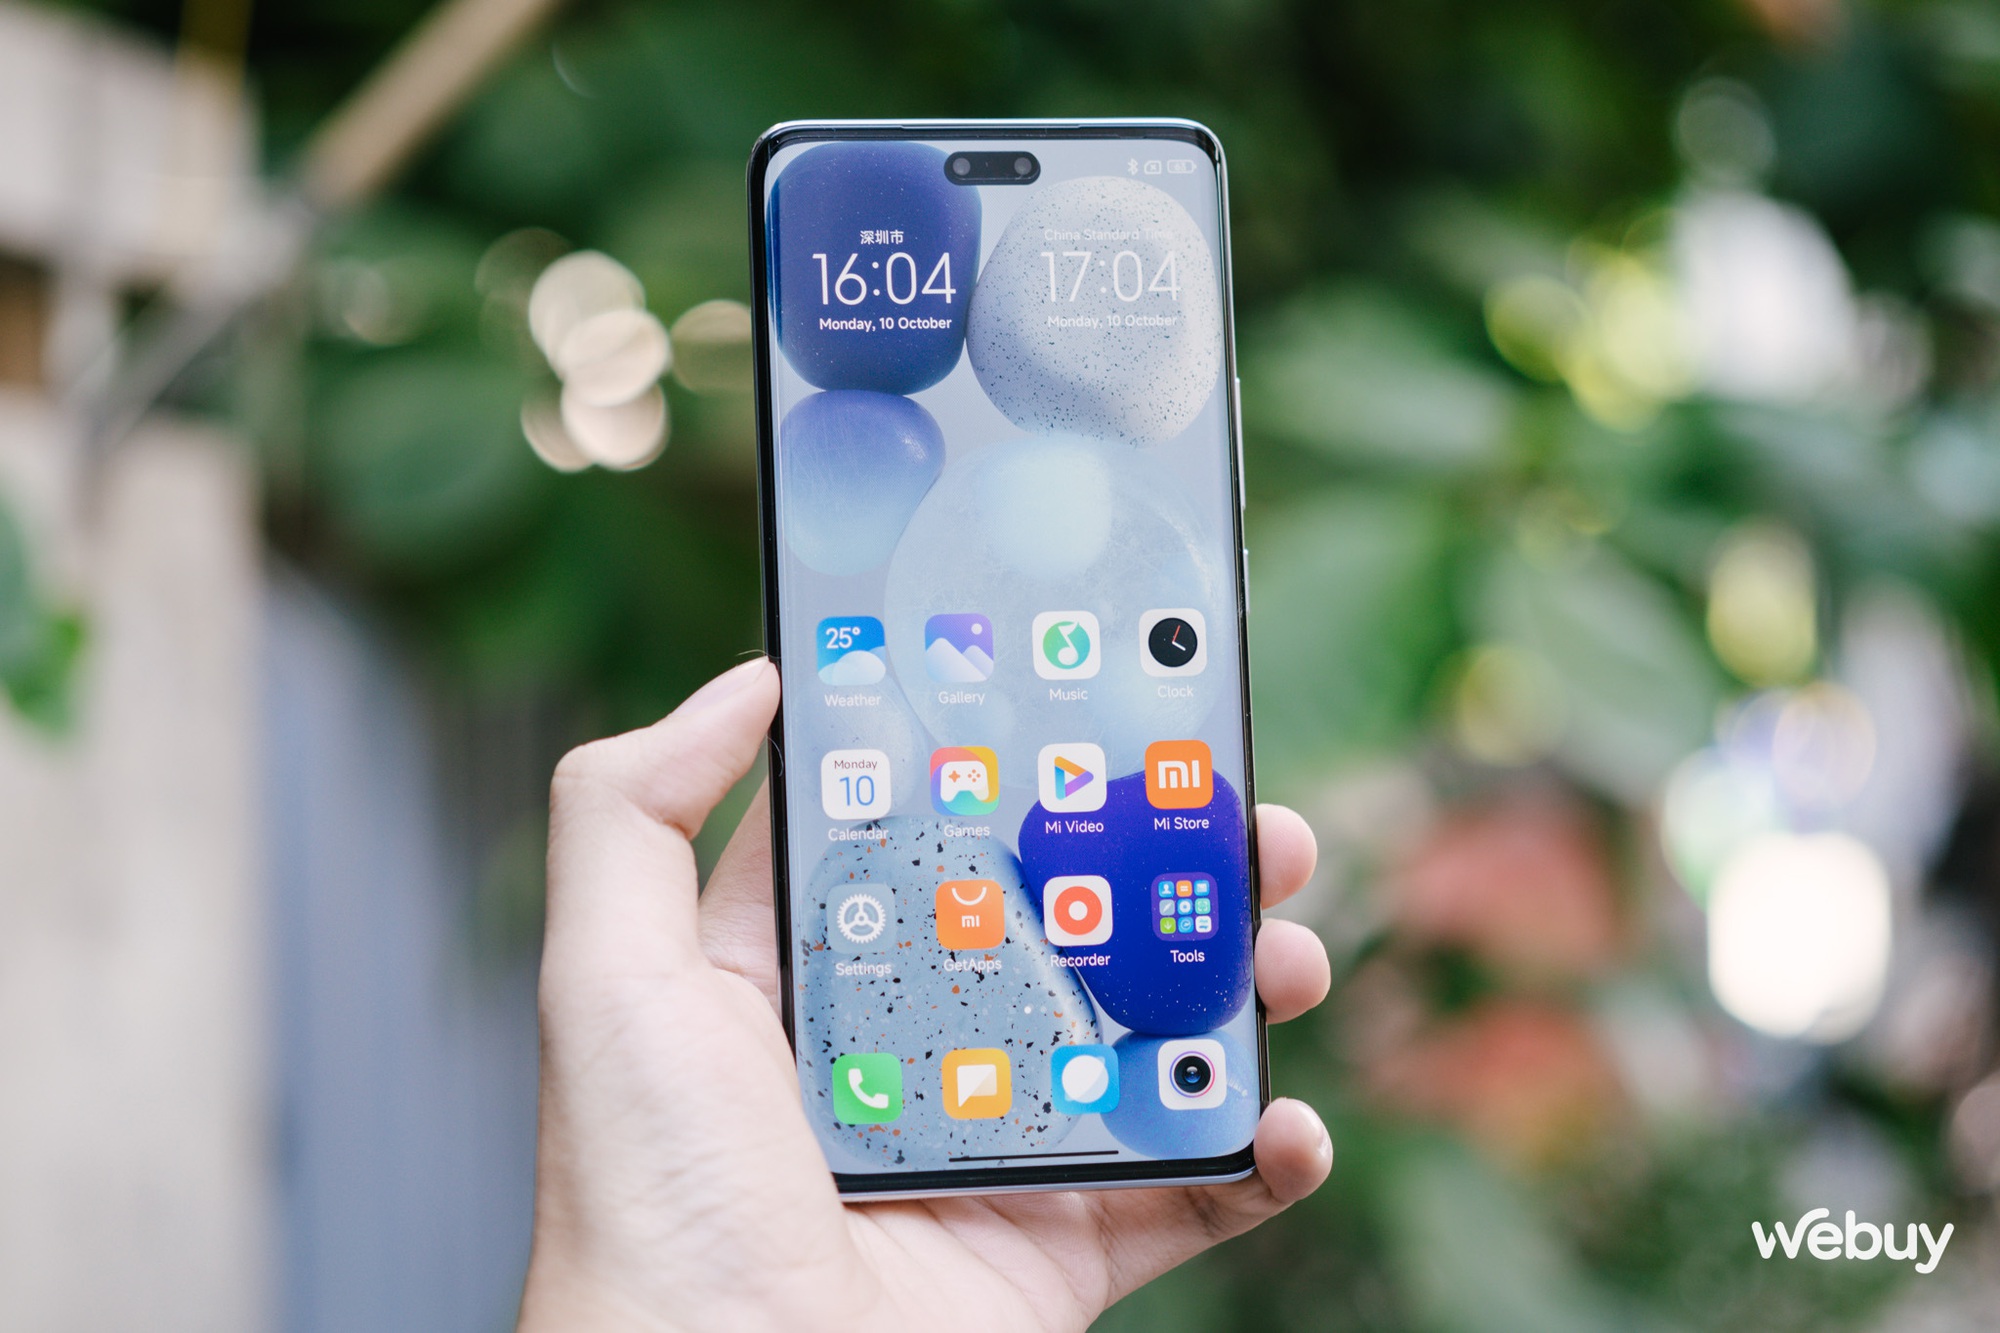 realme is about to launch a low-cost smartphone with 